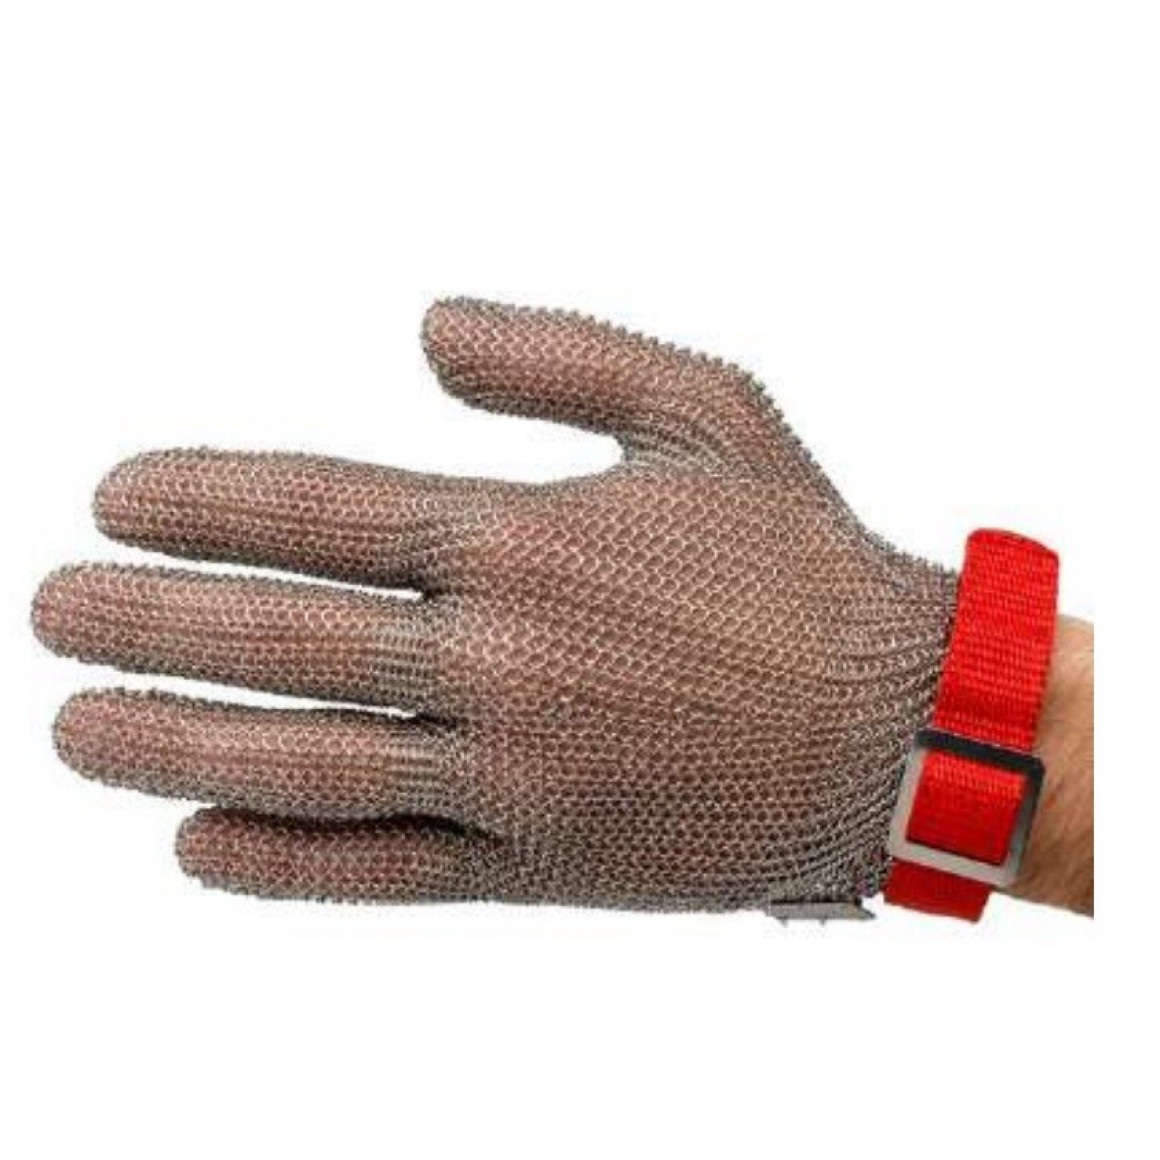 Stainless steel chainmail gloves - size M